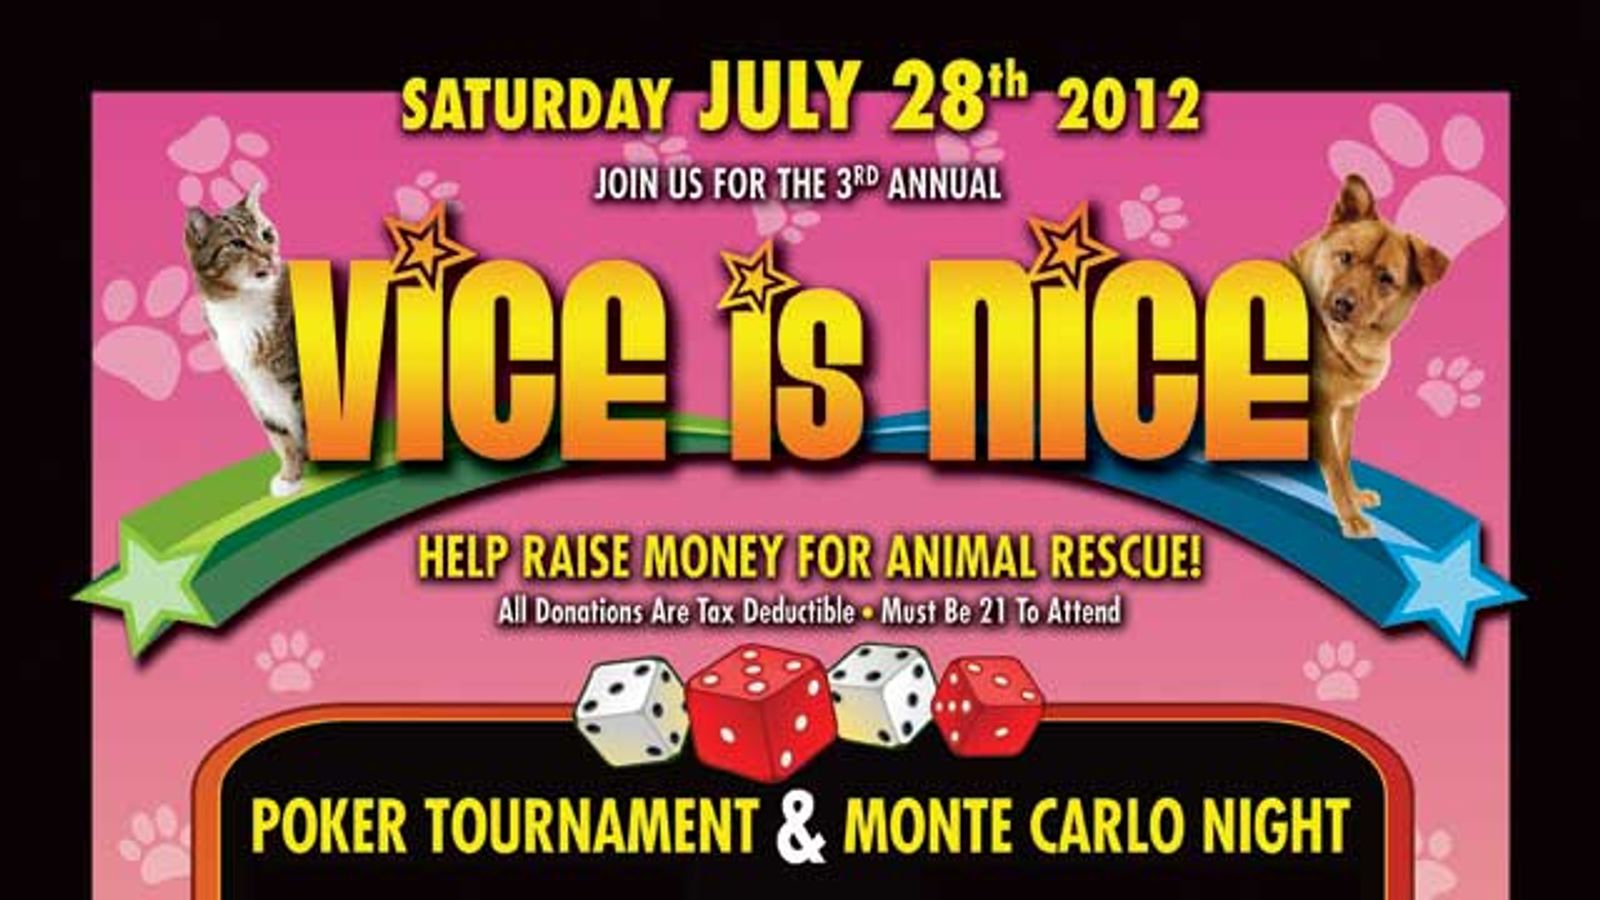 3rd Annual 'Vice Is Nice' Animal Rescue Gala Hatches on July 28